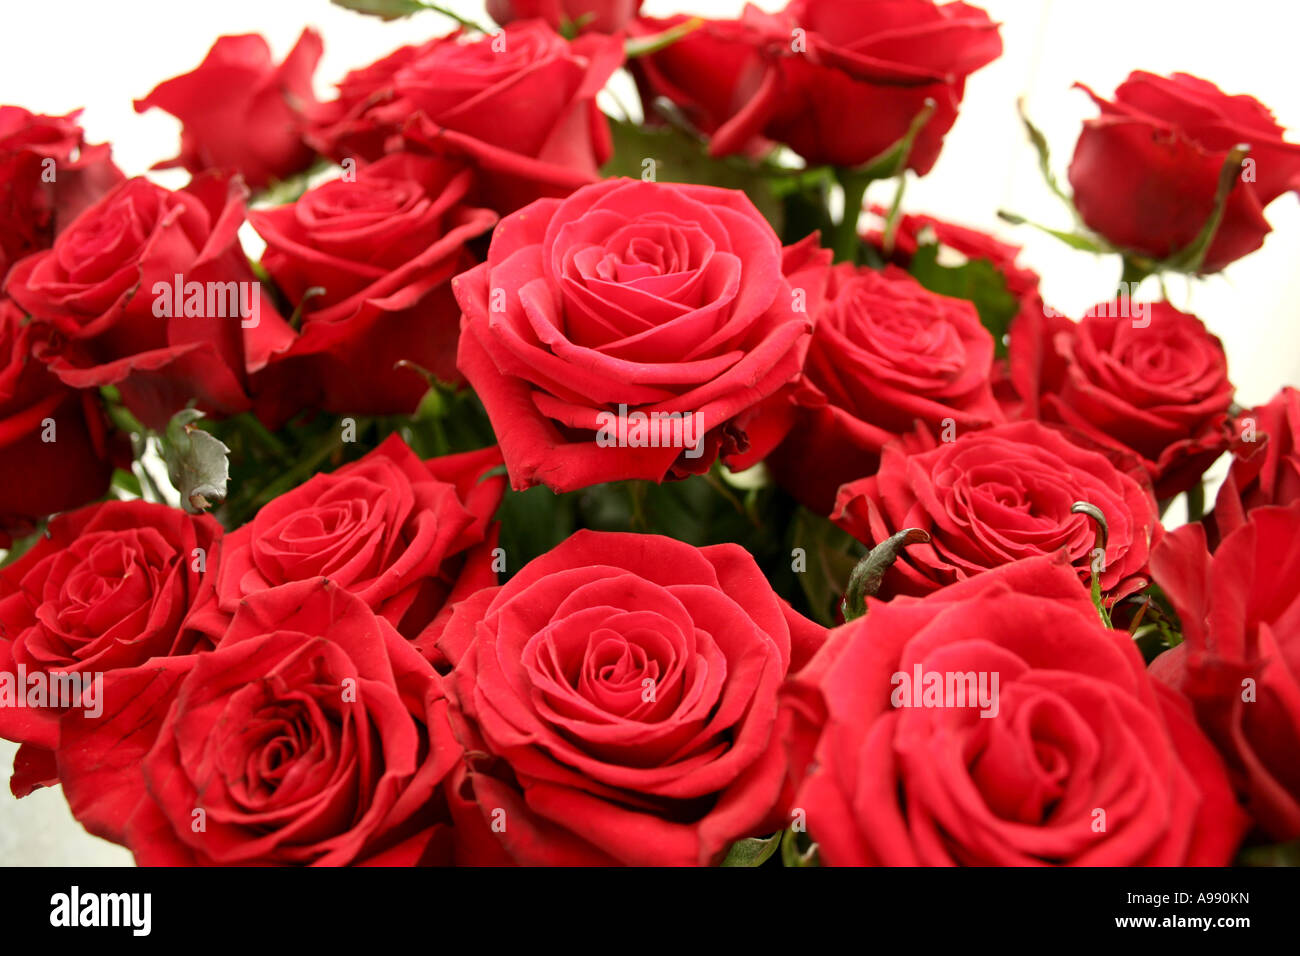 Bouquet of Red Roses in Full Bloom. Stock Photo